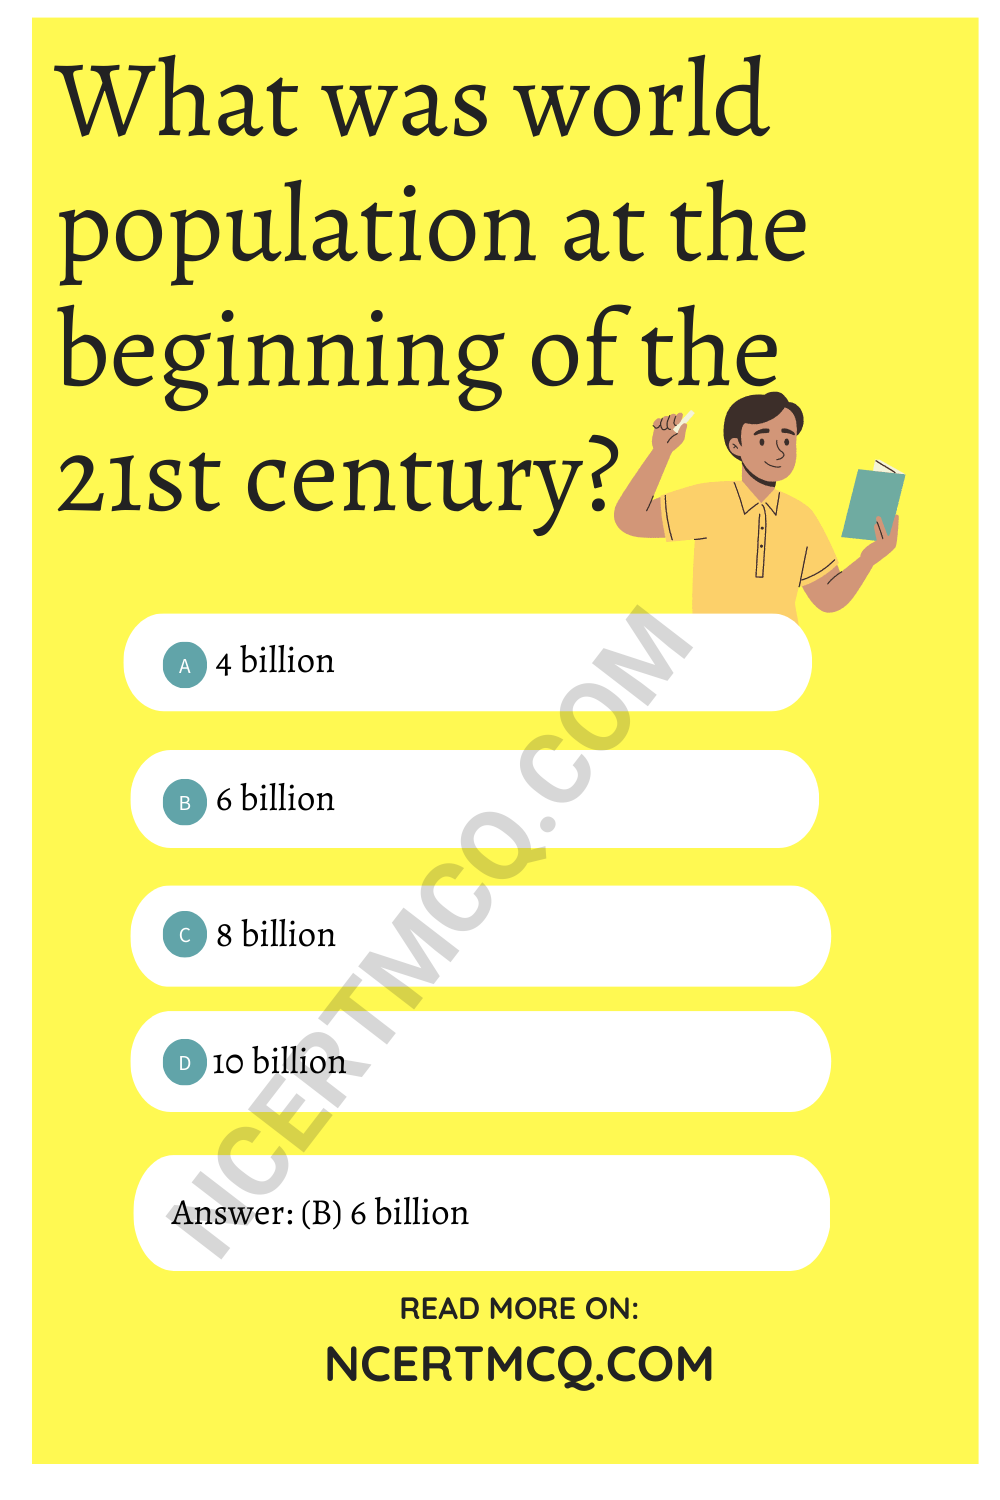 What was world population at the beginning of the 21st century?